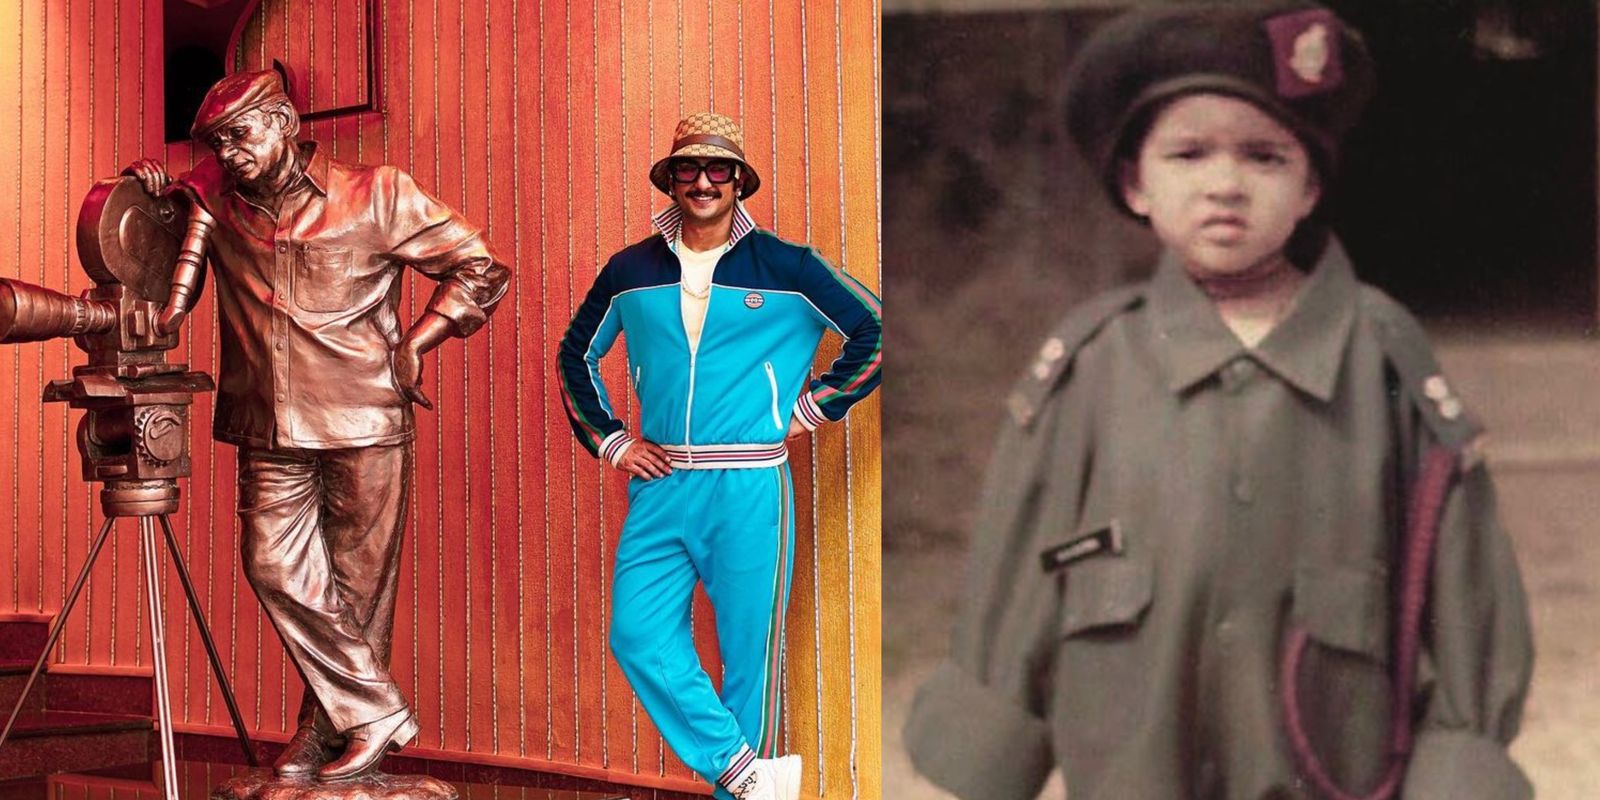 Ranveer Poses Next To Yash Chopra’s Statue; Priyanka Reveals She Used To Follow Her Dad Around Dressed In His Army Uniform